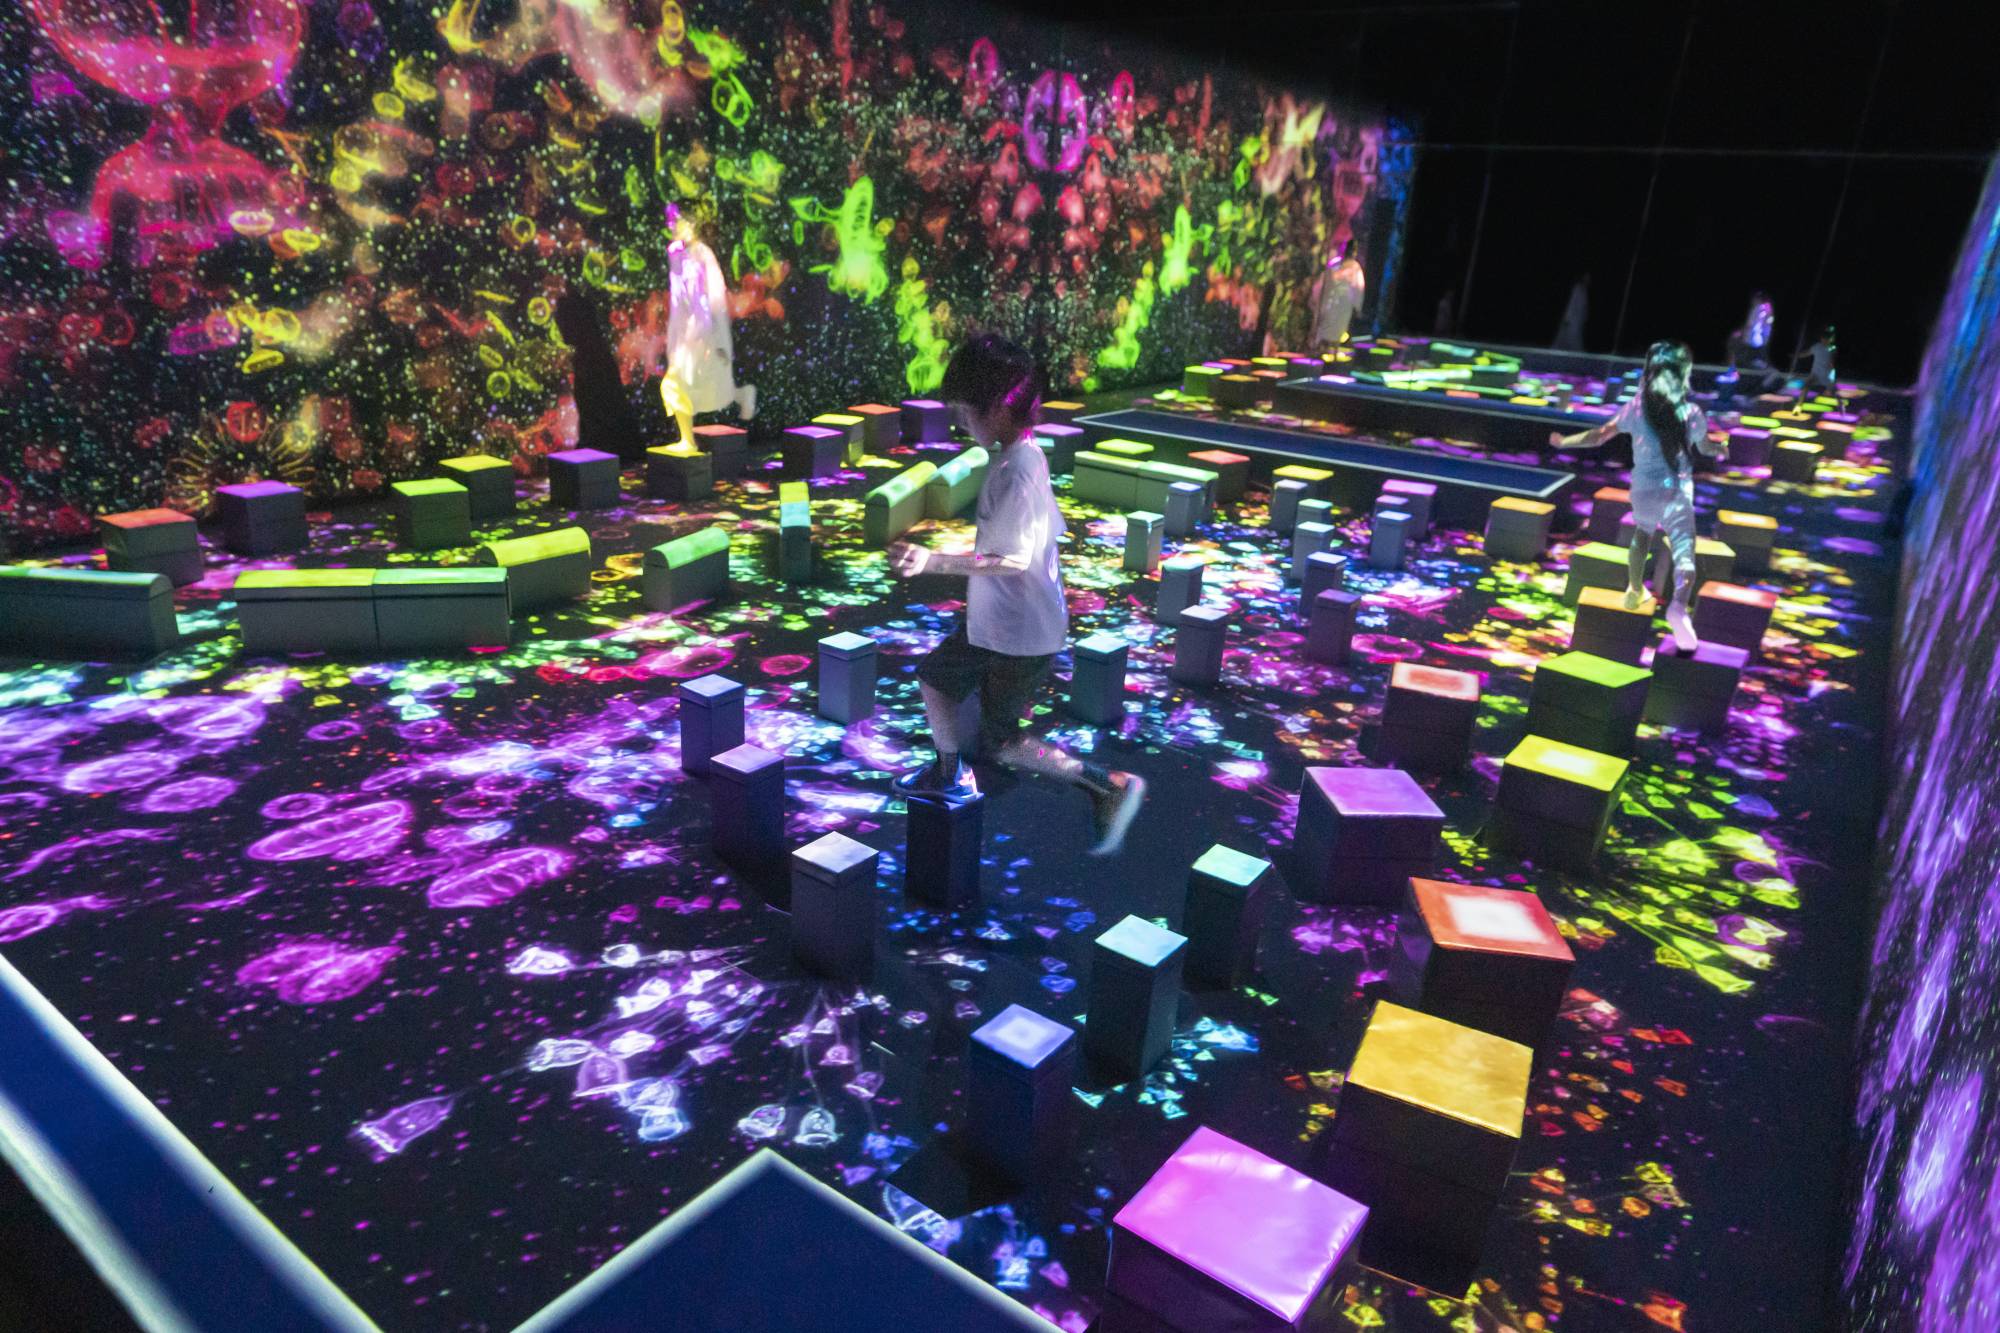 The wobbly “Balance Stepping Stones” change color when you step on them, emitting light over the digital microorganisms below. | TEAMLAB BORDERLESS, TOKYO © TEAMLAB